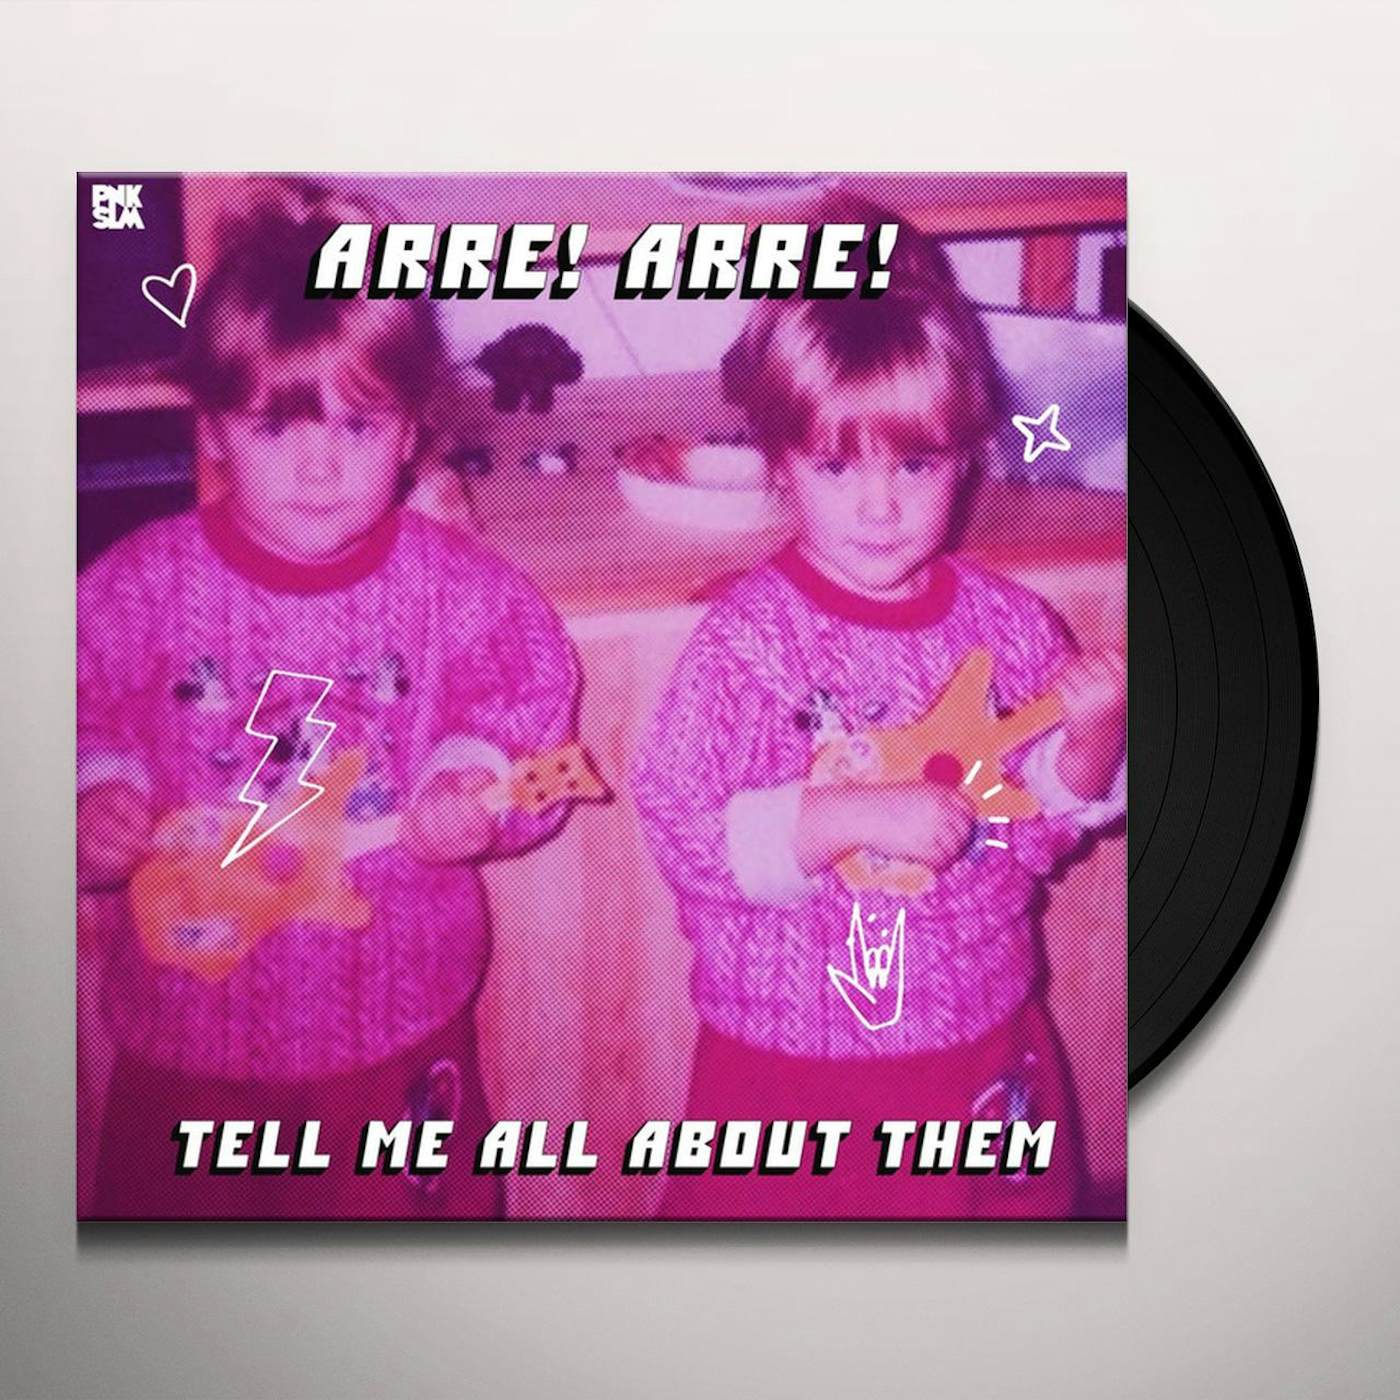 Arre! Arre! Tell Me All About Them Vinyl Record